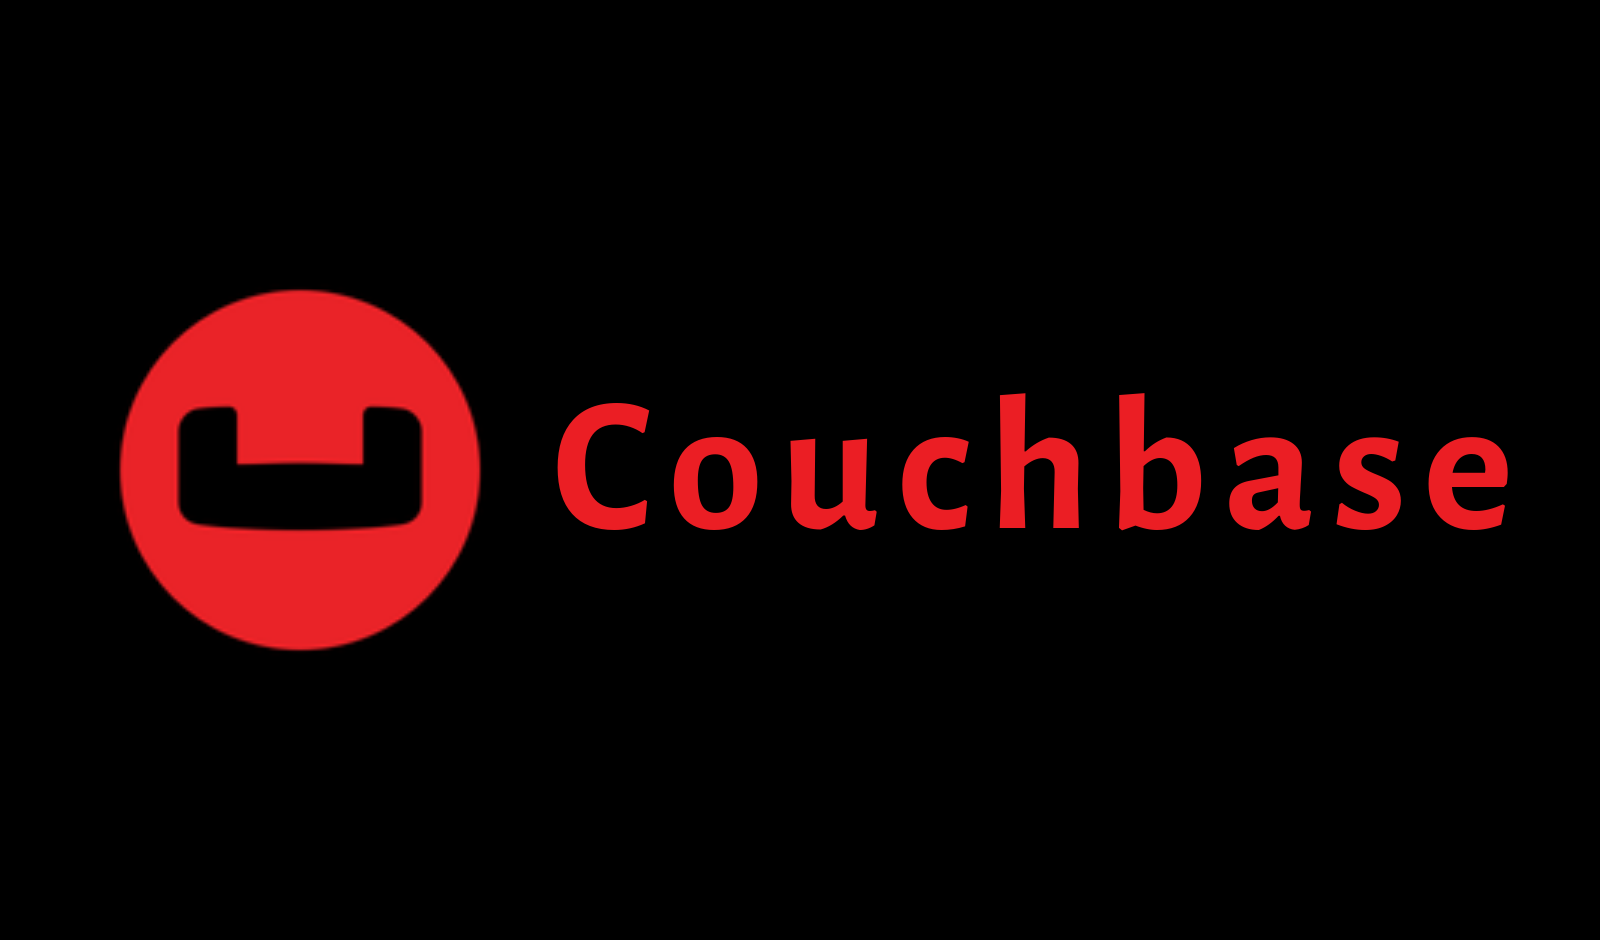 Best Couchbase Online Training with Real time Scenarios and Project.